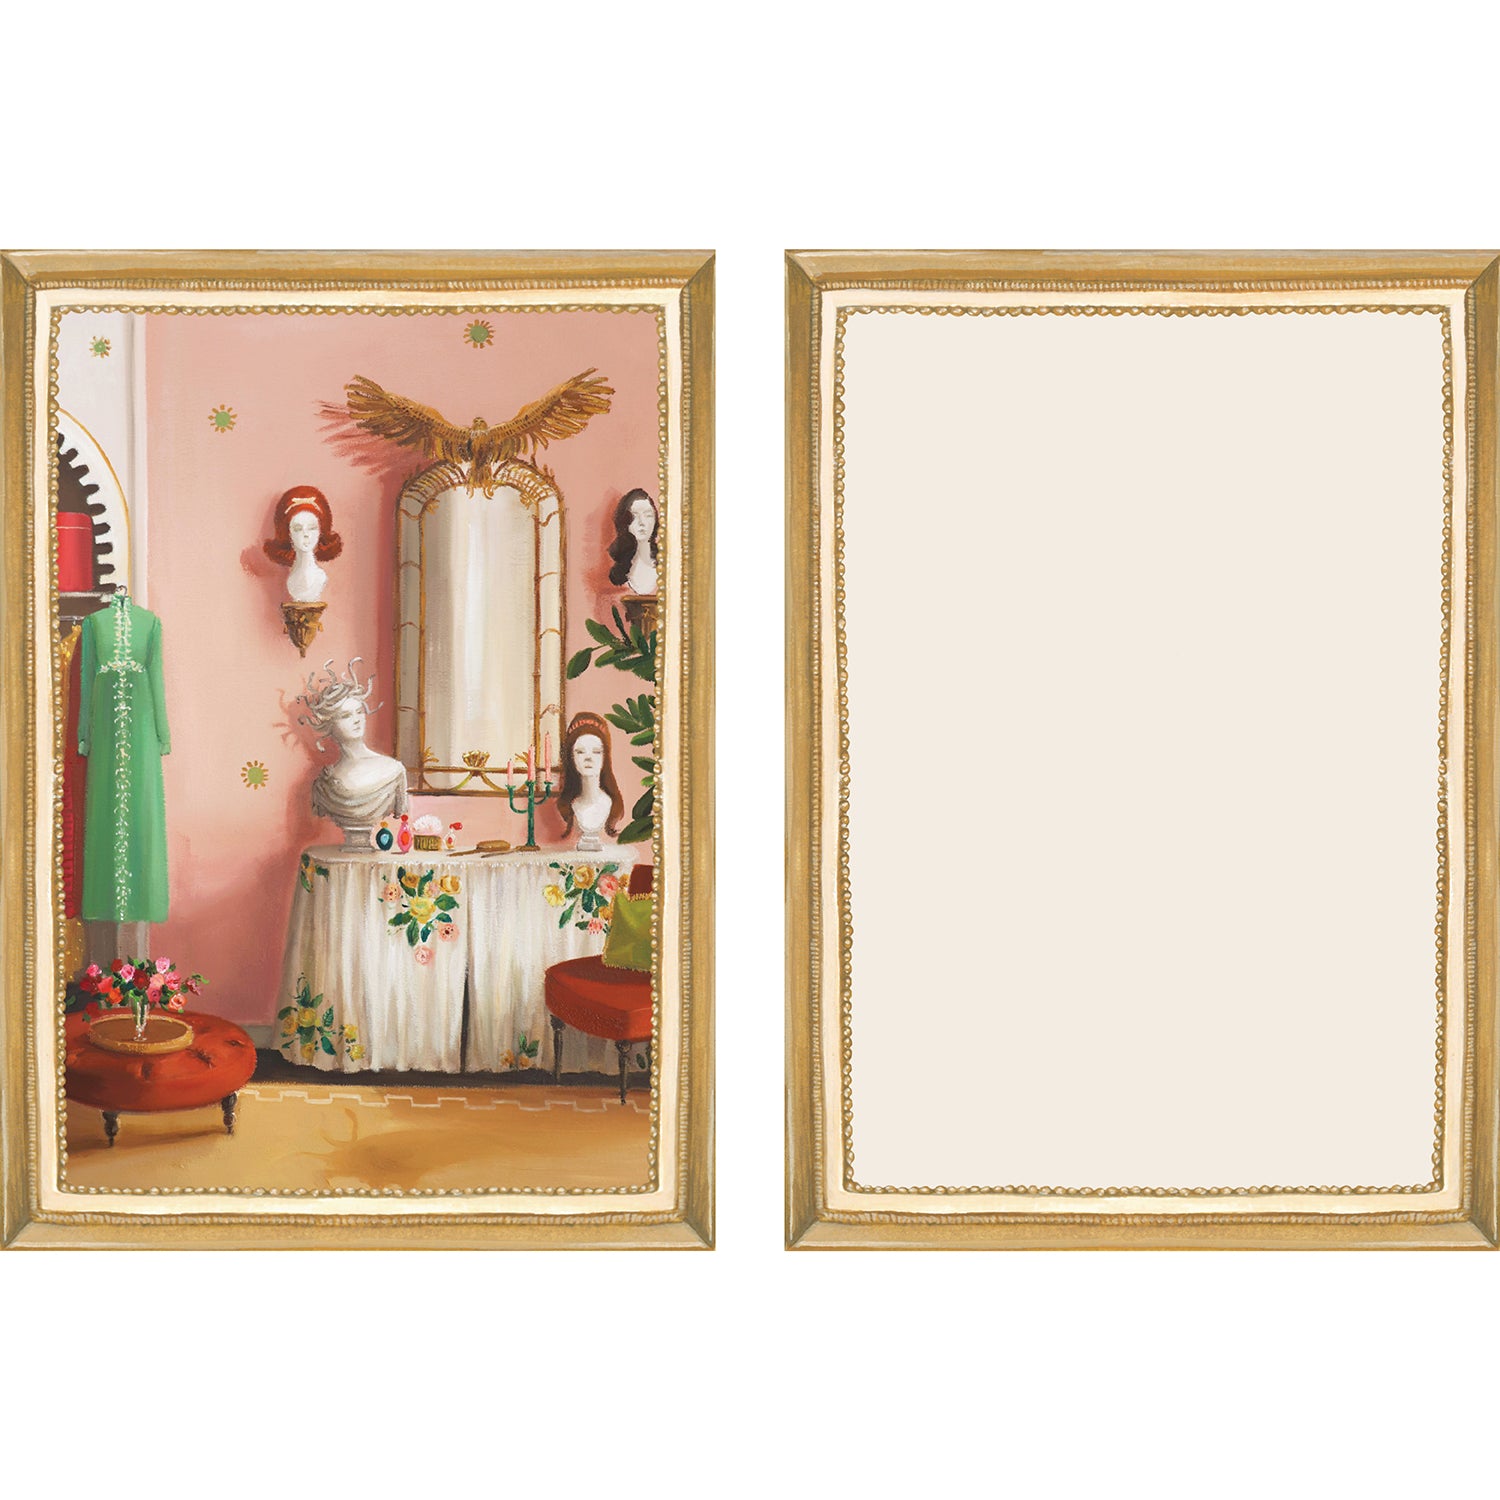 The illustrated front and blank back of a Flat Note, both sides framed in gold, featuring a painterly illustration of a vanity with various wigs on mannequin heads. 